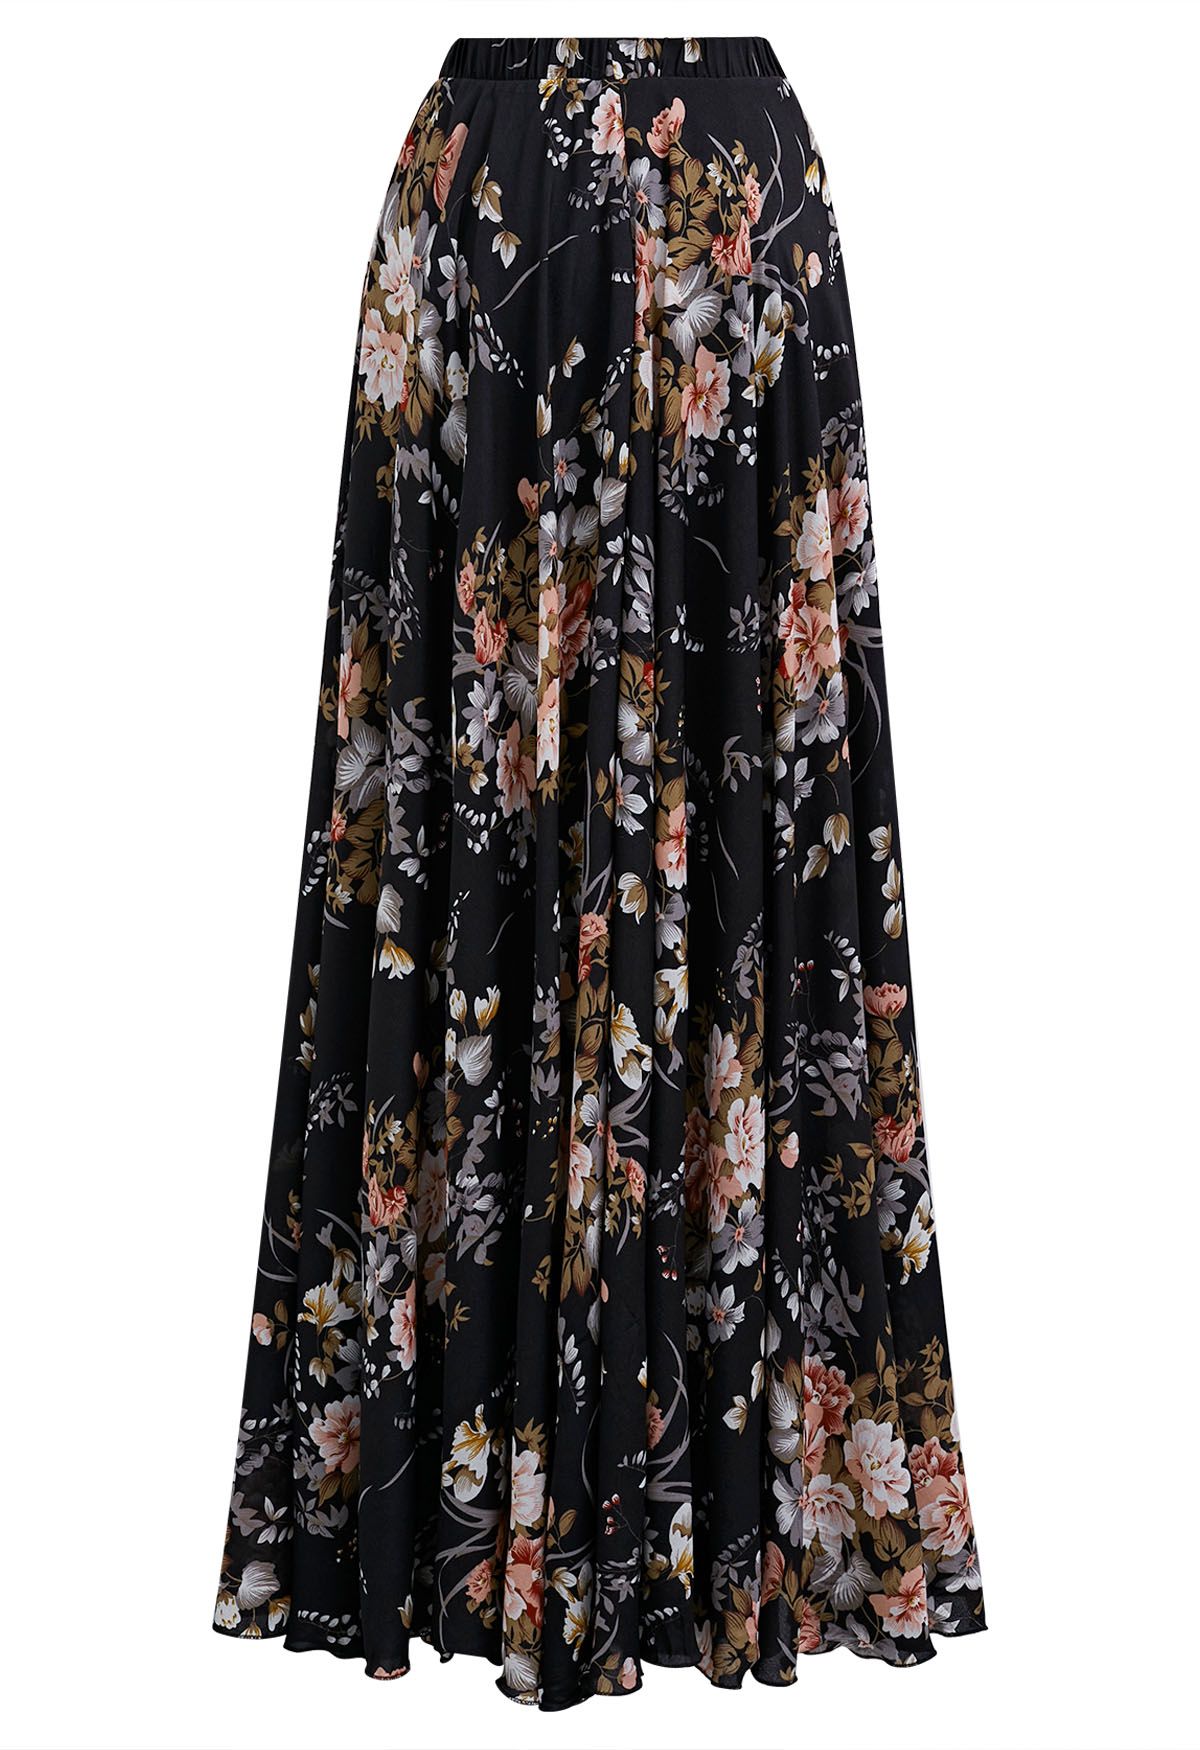 Spellbinding Bouquet Chiffon Maxi Skirt in Black - Retro, Indie and ...